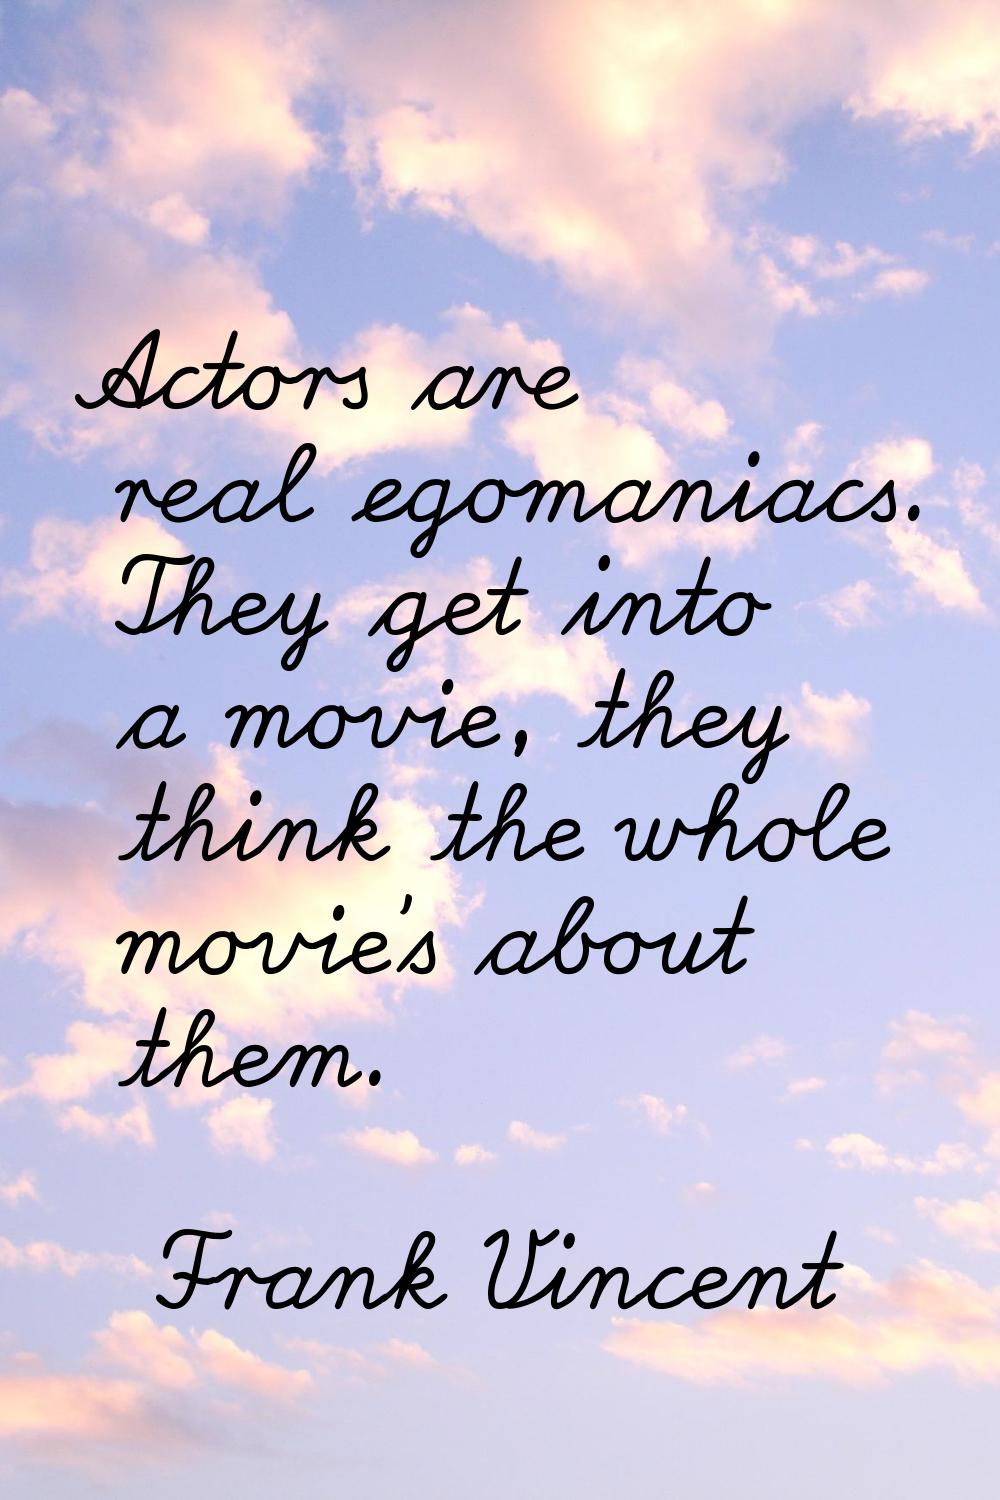 Actors are real egomaniacs. They get into a movie, they think the whole movie's about them.